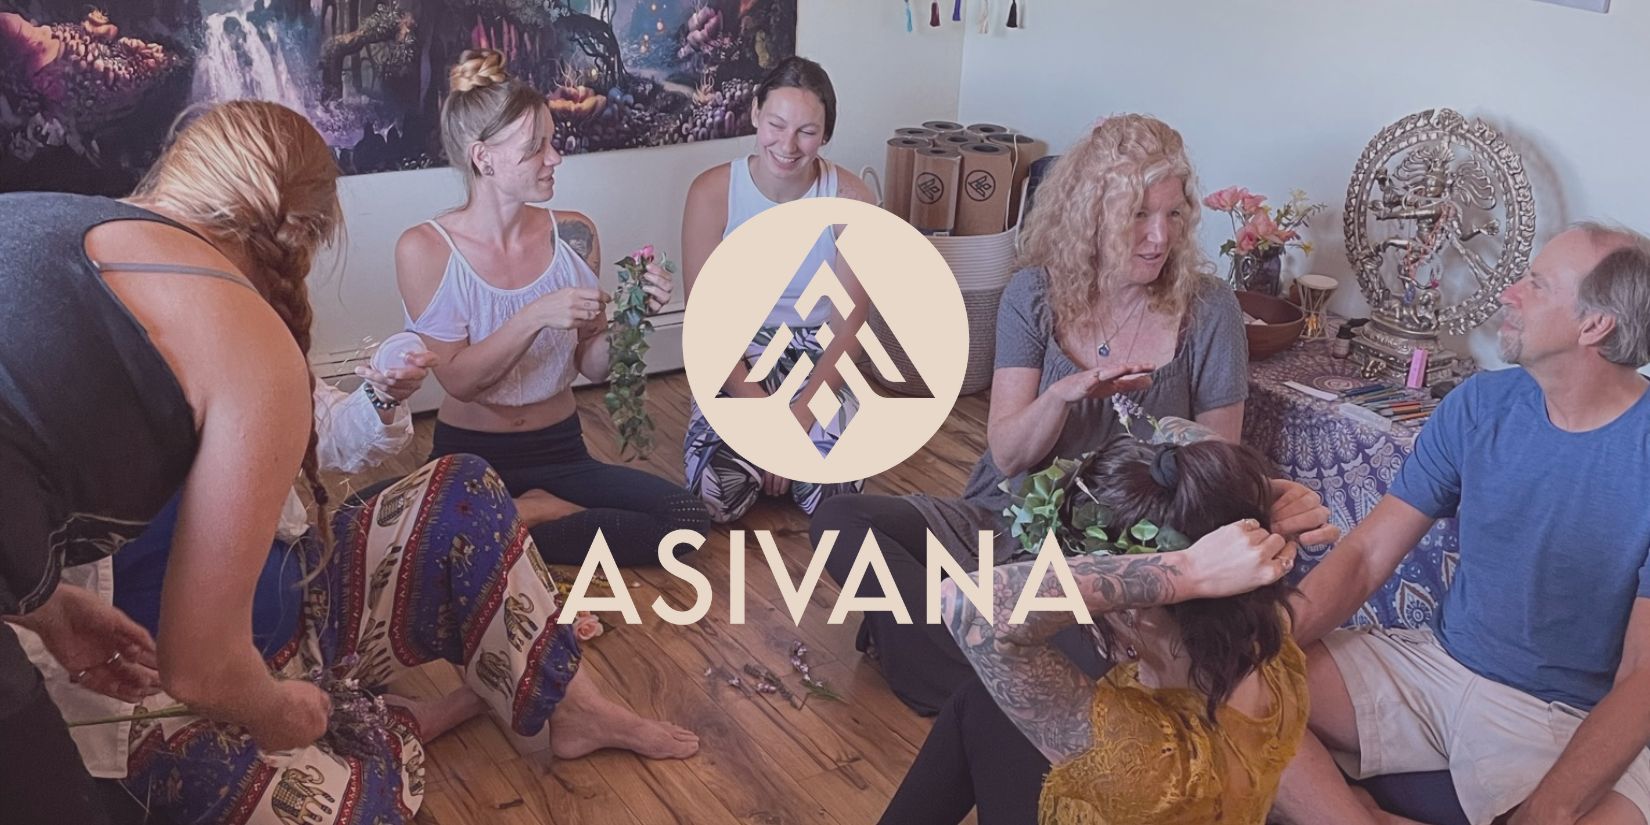 Asivana Yoga Community gathers for shared experience together